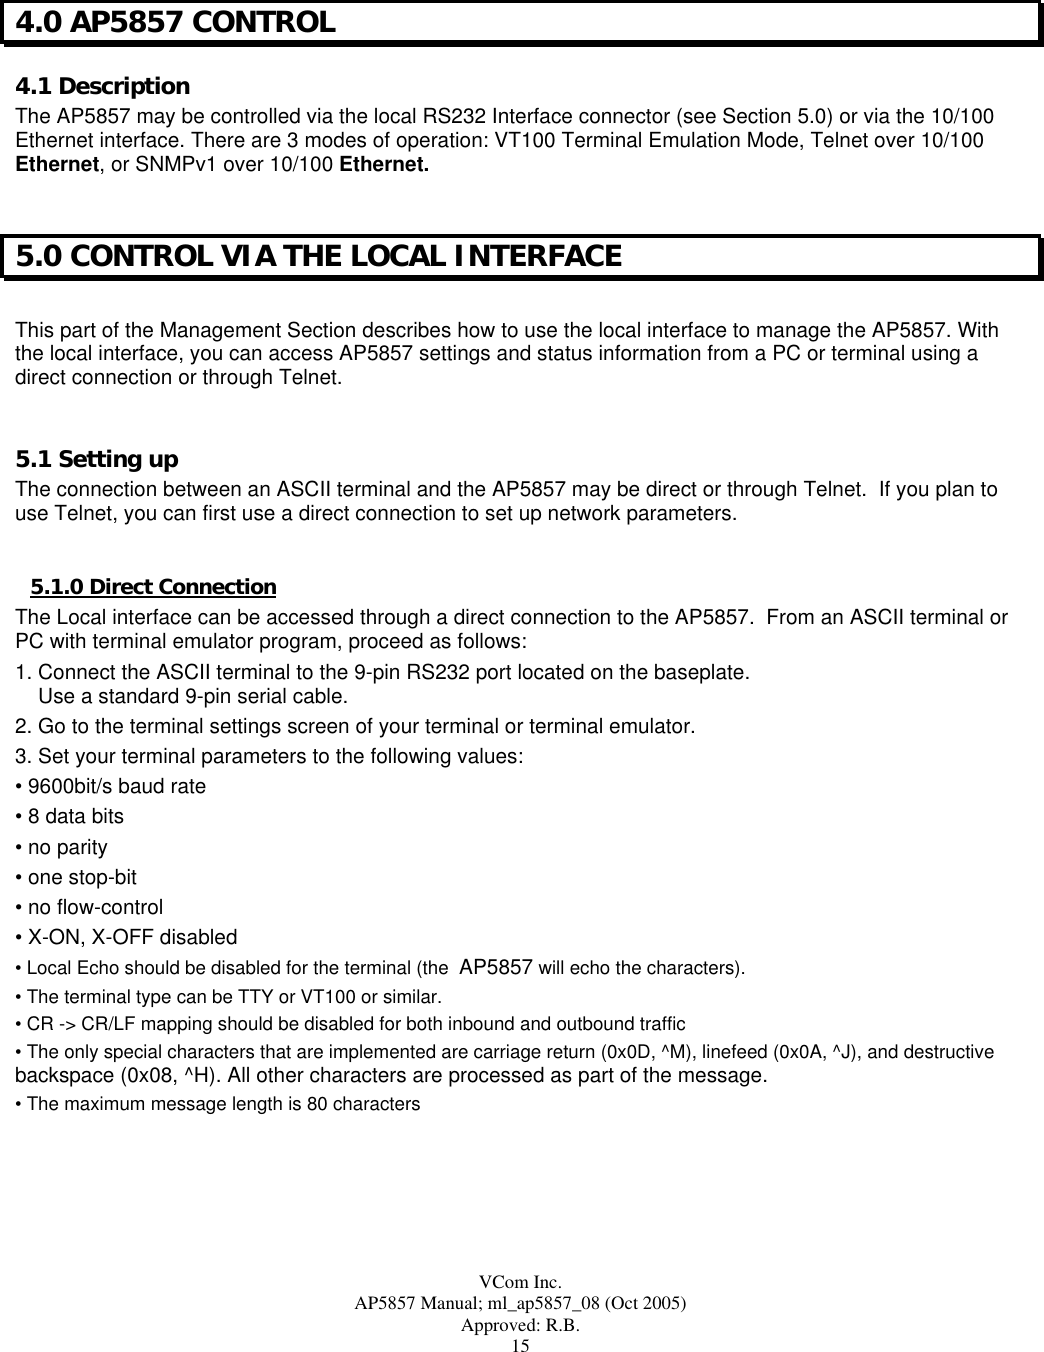  VCom Inc. AP5857 Manual; ml_ap5857_08 (Oct 2005) Approved: R.B. 15 4.0 AP5857 CONTROL 4.1 Description The AP5857 may be controlled via the local RS232 Interface connector (see Section 5.0) or via the 10/100 Ethernet interface. There are 3 modes of operation: VT100 Terminal Emulation Mode, Telnet over 10/100 Ethernet, or SNMPv1 over 10/100 Ethernet.  5.0 CONTROL VIA THE LOCAL INTERFACE  This part of the Management Section describes how to use the local interface to manage the AP5857. With the local interface, you can access AP5857 settings and status information from a PC or terminal using a direct connection or through Telnet.  5.1 Setting up The connection between an ASCII terminal and the AP5857 may be direct or through Telnet.  If you plan to use Telnet, you can first use a direct connection to set up network parameters.  5.1.0 Direct Connection The Local interface can be accessed through a direct connection to the AP5857.  From an ASCII terminal or PC with terminal emulator program, proceed as follows: 1. Connect the ASCII terminal to the 9-pin RS232 port located on the baseplate.       Use a standard 9-pin serial cable. 2. Go to the terminal settings screen of your terminal or terminal emulator.  3. Set your terminal parameters to the following values: • 9600bit/s baud rate • 8 data bits • no parity • one stop-bit • no flow-control • X-ON, X-OFF disabled • Local Echo should be disabled for the terminal (the  AP5857 will echo the characters). • The terminal type can be TTY or VT100 or similar. • CR -&gt; CR/LF mapping should be disabled for both inbound and outbound traffic • The only special characters that are implemented are carriage return (0x0D, ^M), linefeed (0x0A, ^J), and destructive backspace (0x08, ^H). All other characters are processed as part of the message. • The maximum message length is 80 characters  